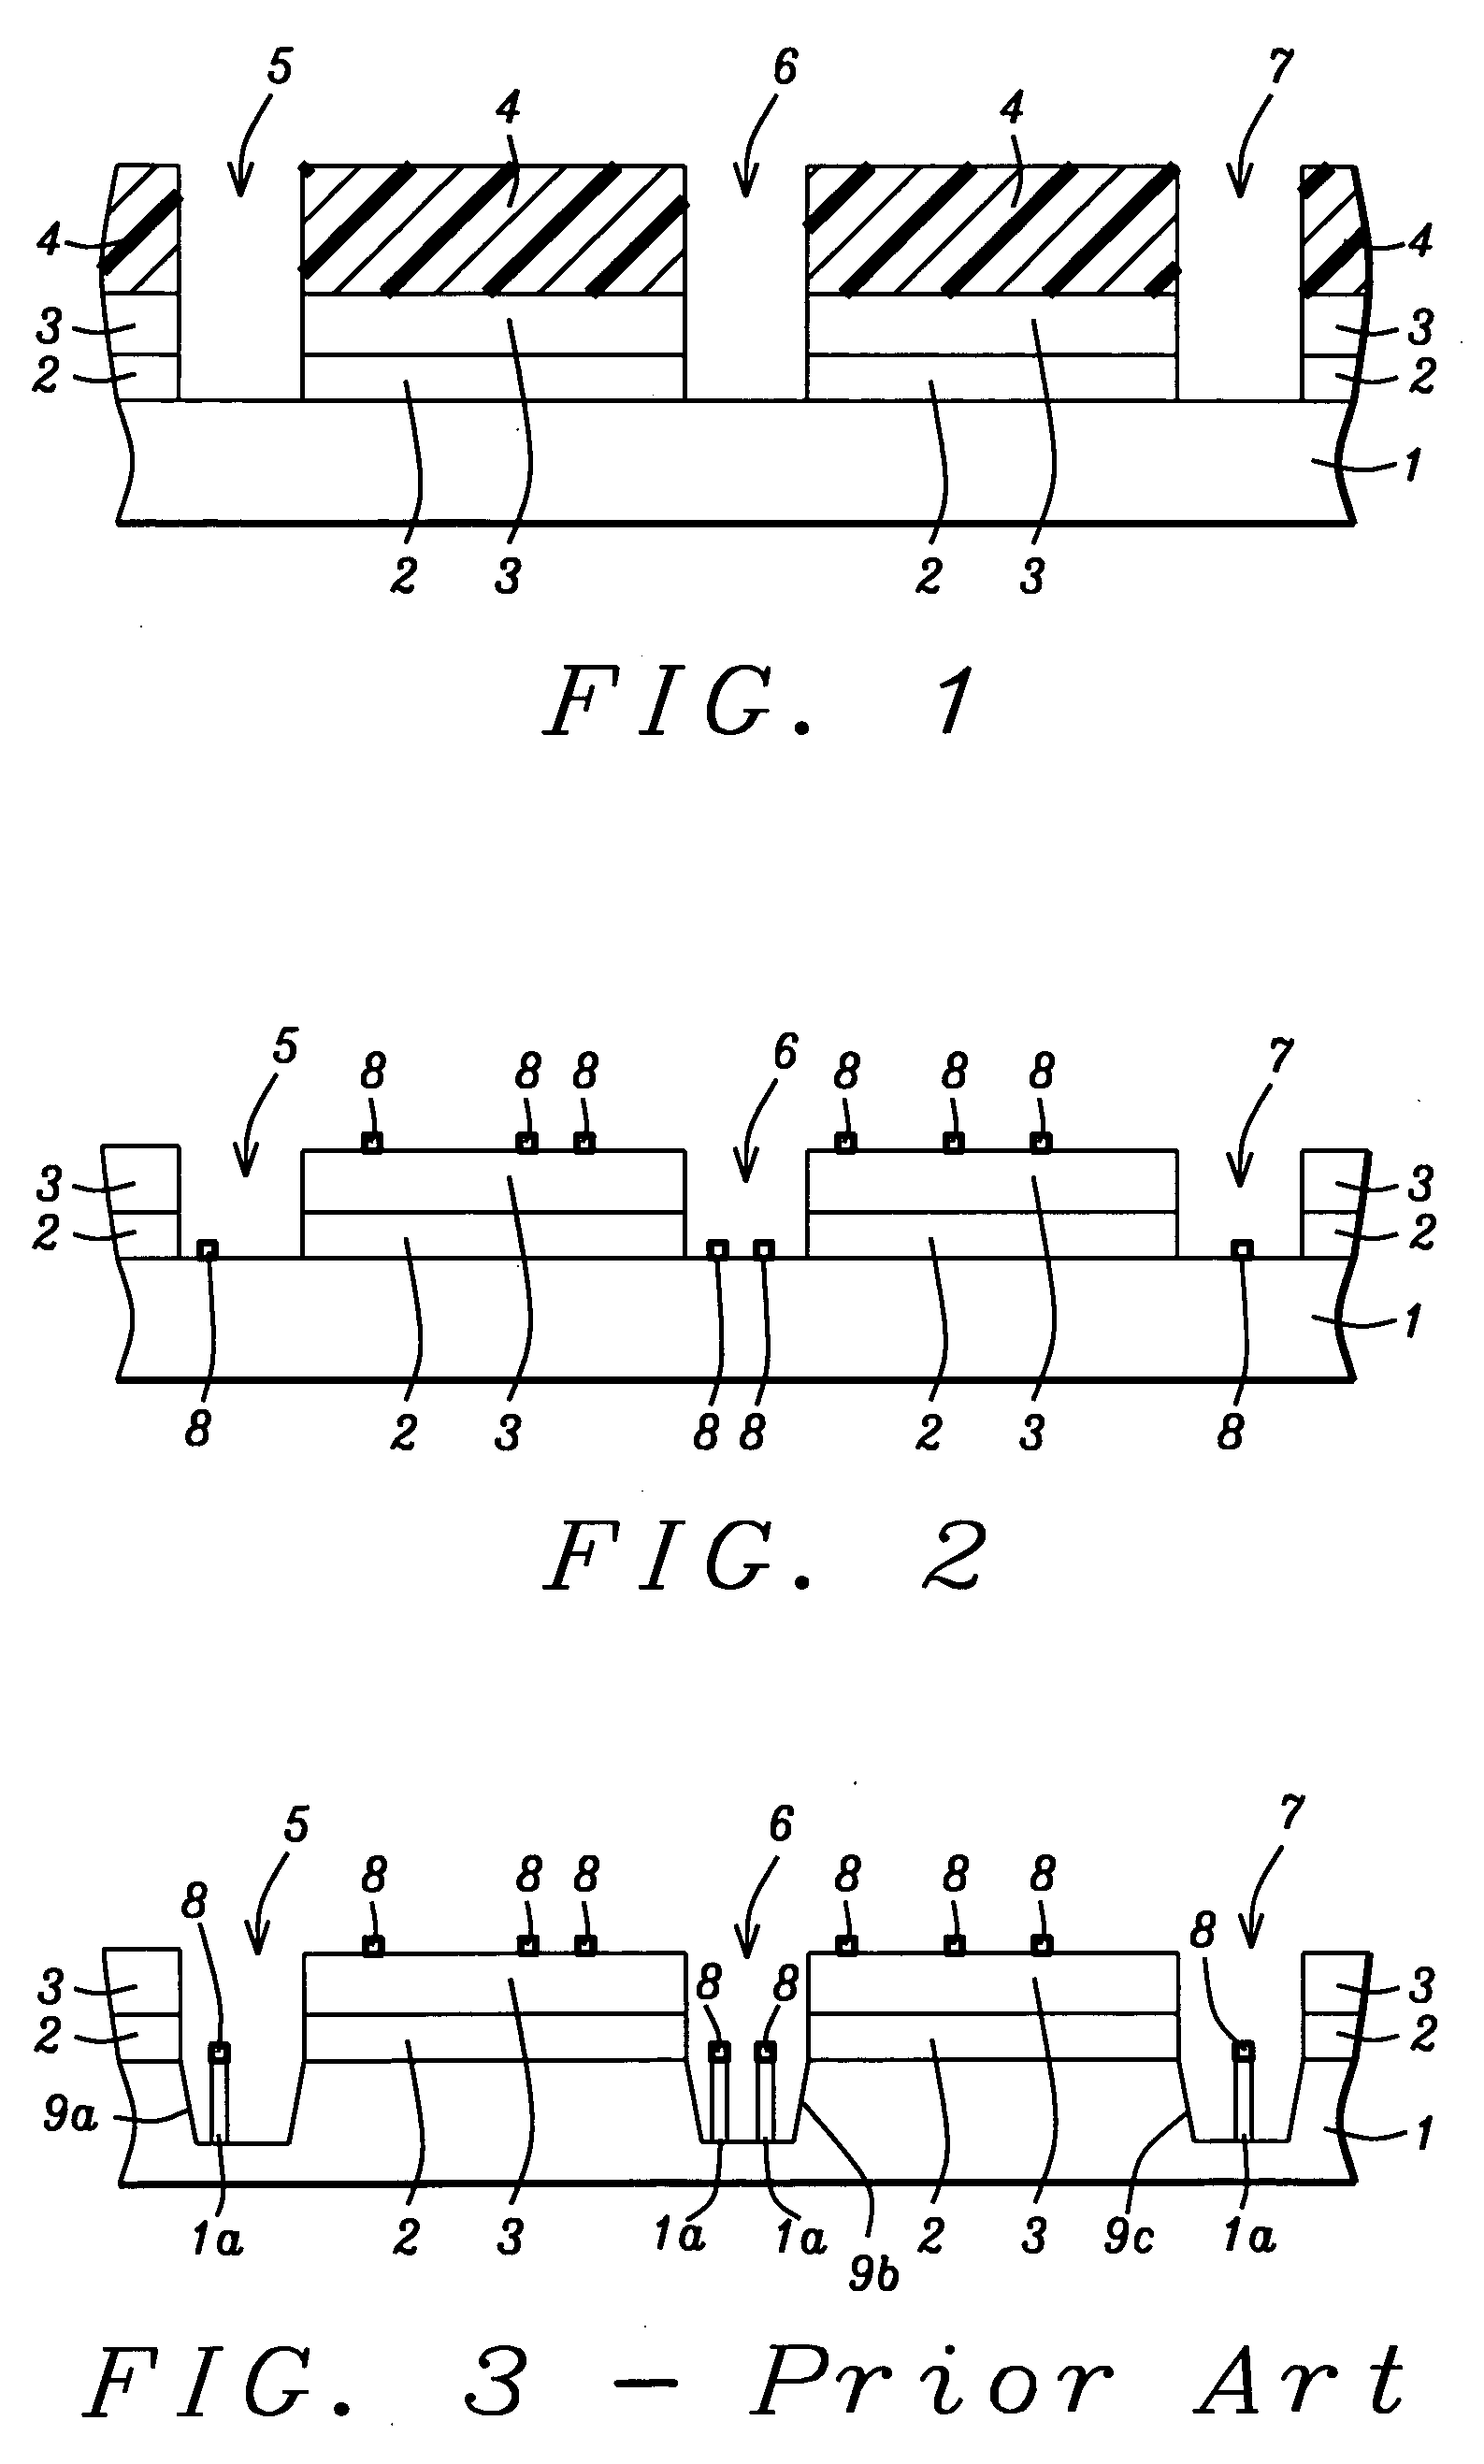 Method of in-situ damage removal - post O2 dry process